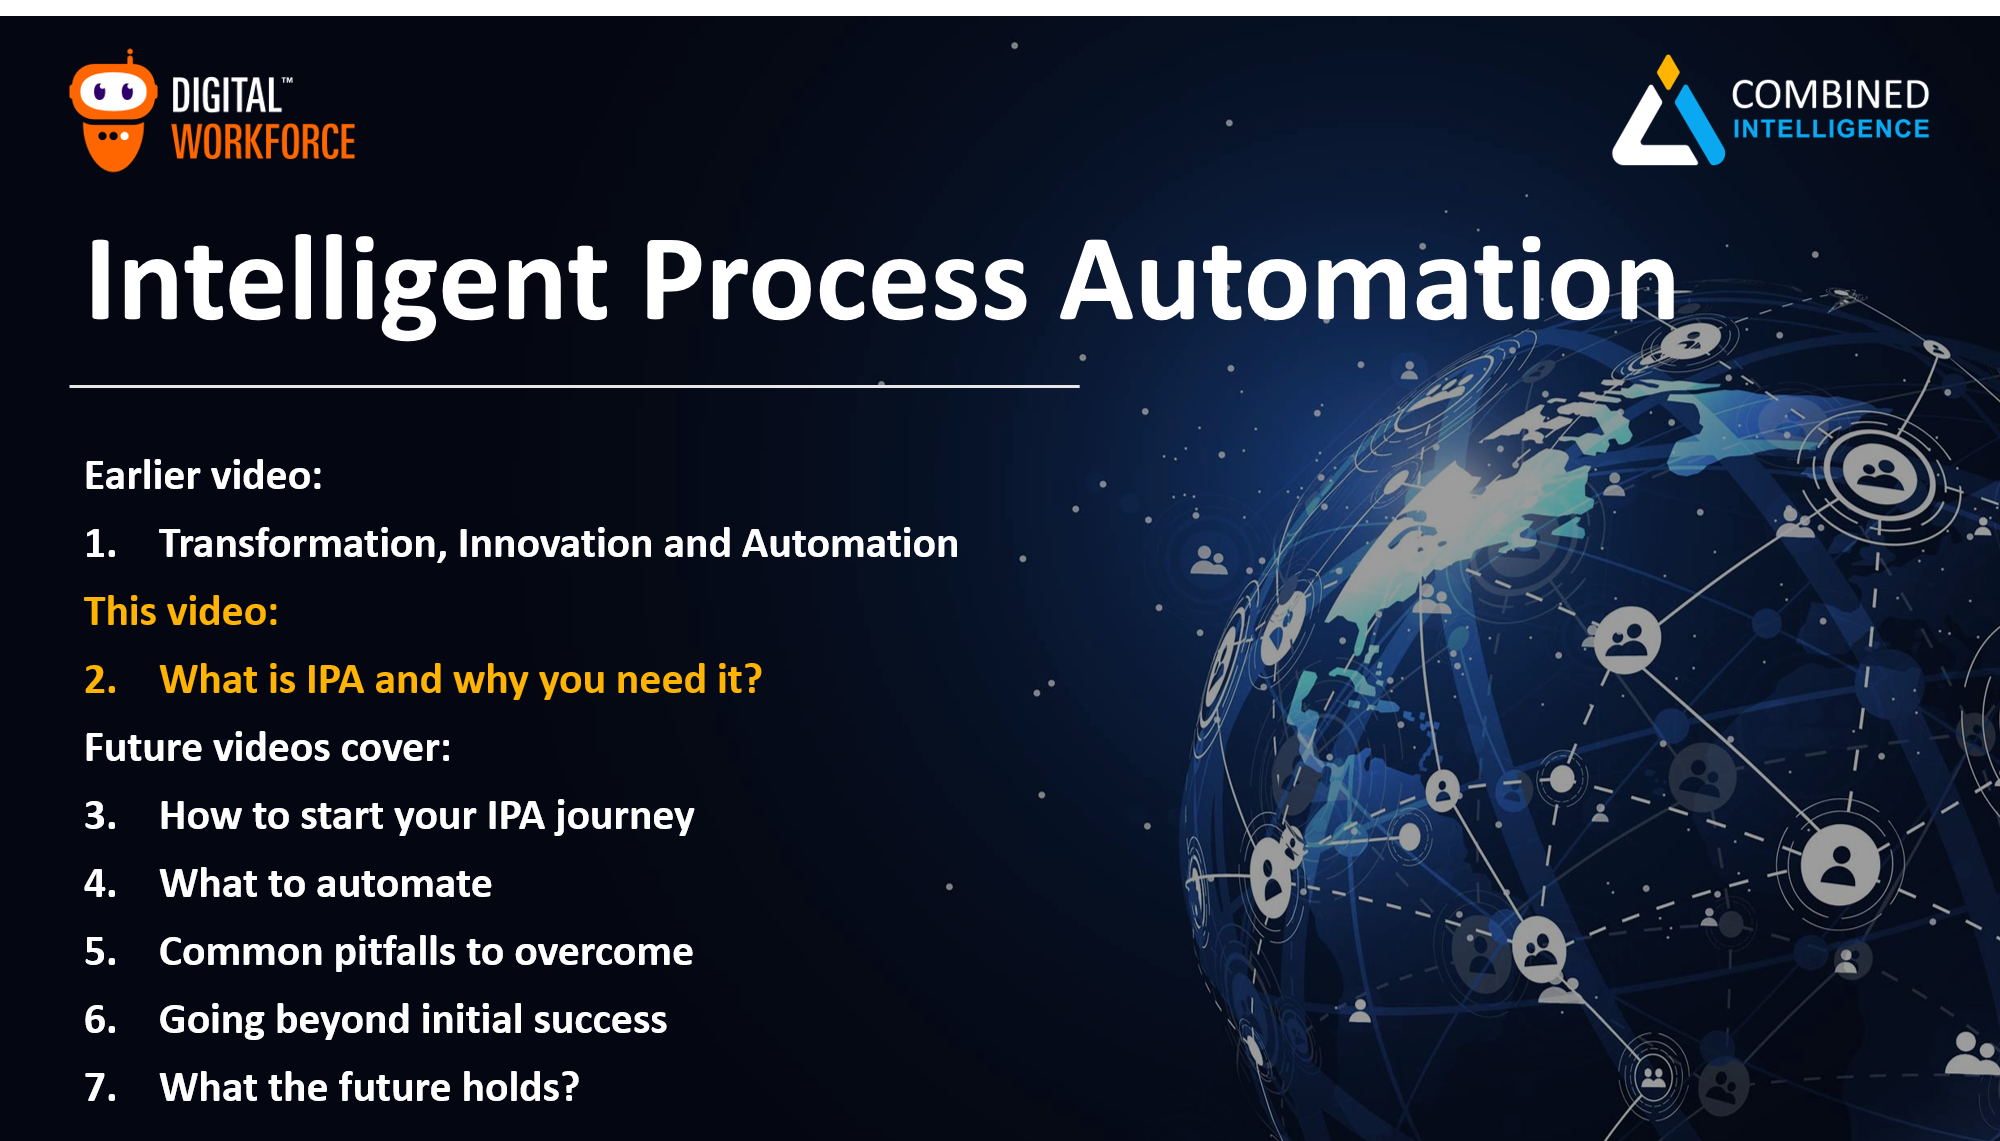 Intelligent Process Automation Video 2 – What is Intelligent Process Automation and why you need it!